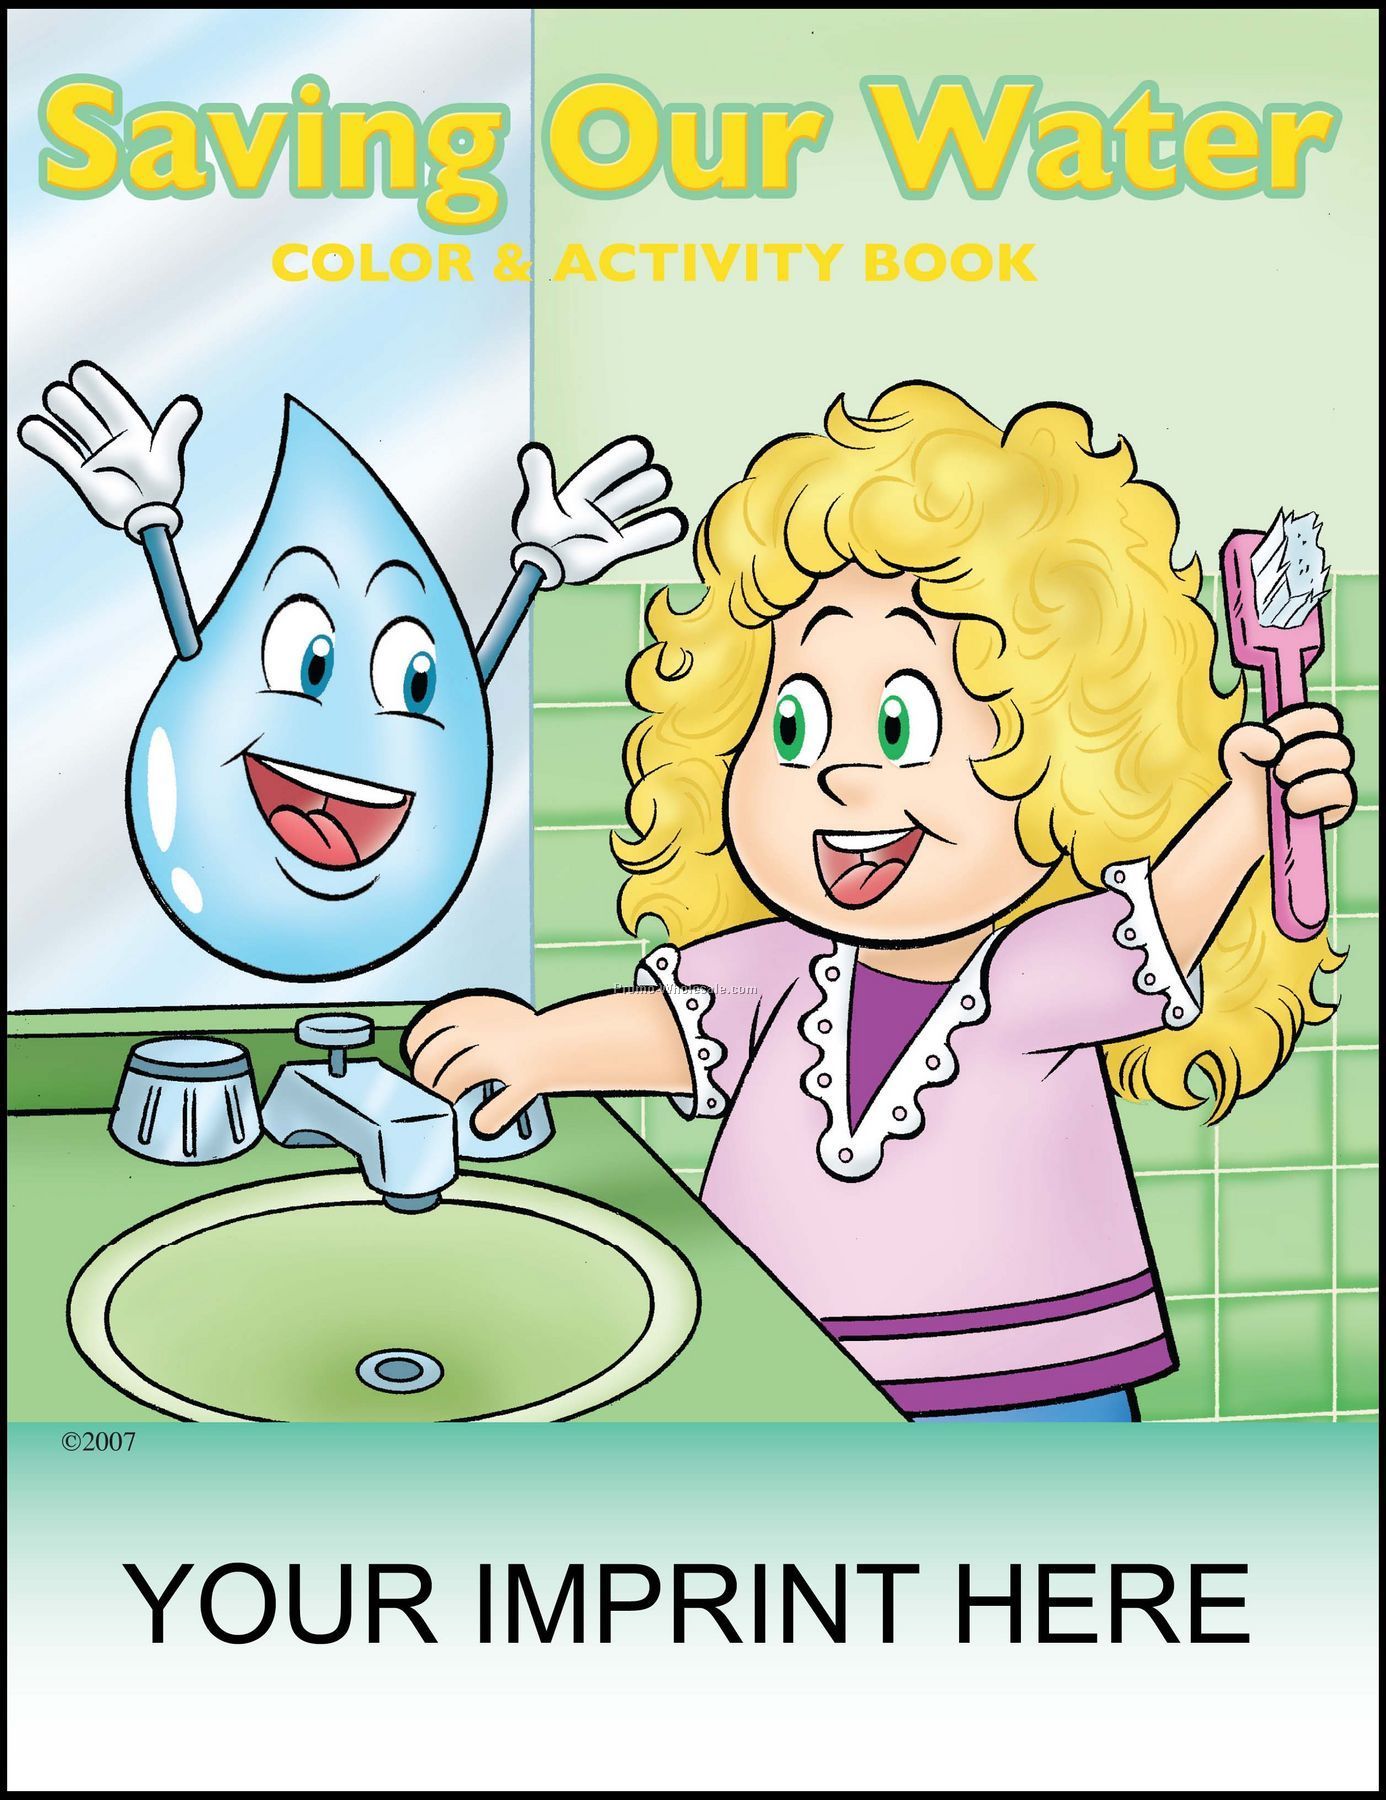 8-3/8"x10-7/8" Saving Our Water Coloring & Activity Book